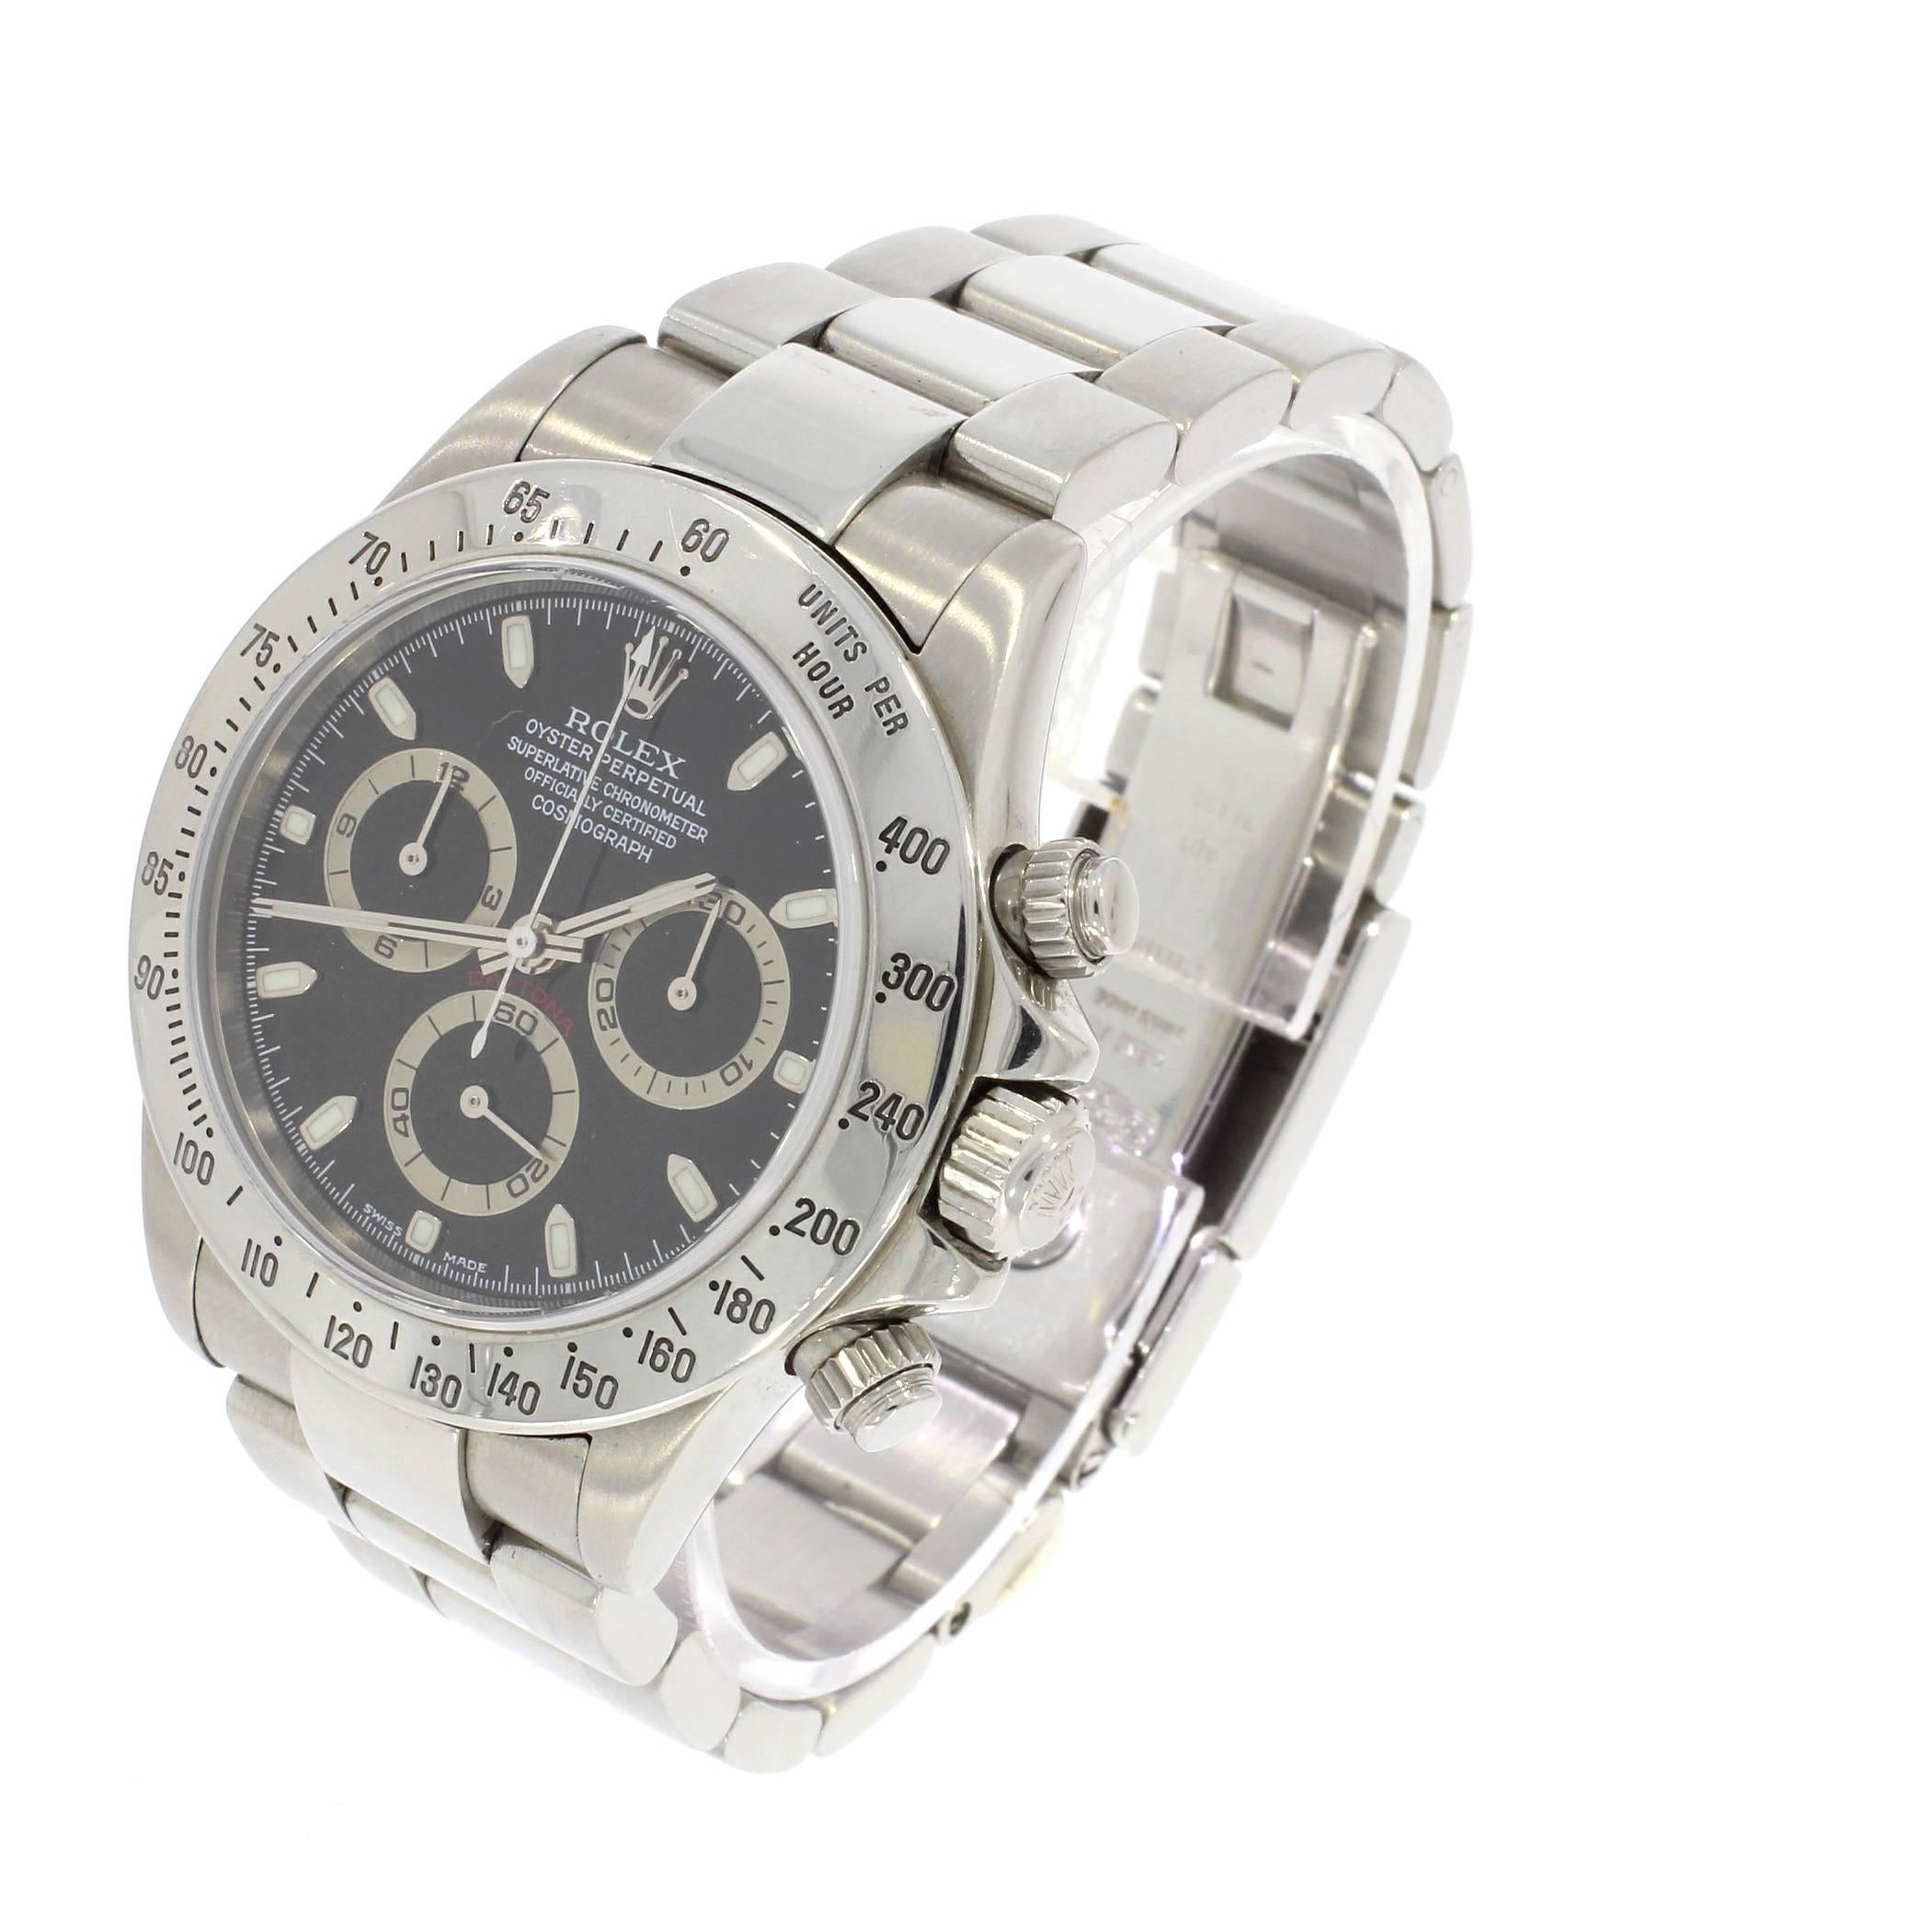 Rolex Daytona Stainless Steel Chronograph 116520 Automatic Wrist Watch In Excellent Condition In Epsom, Surrey